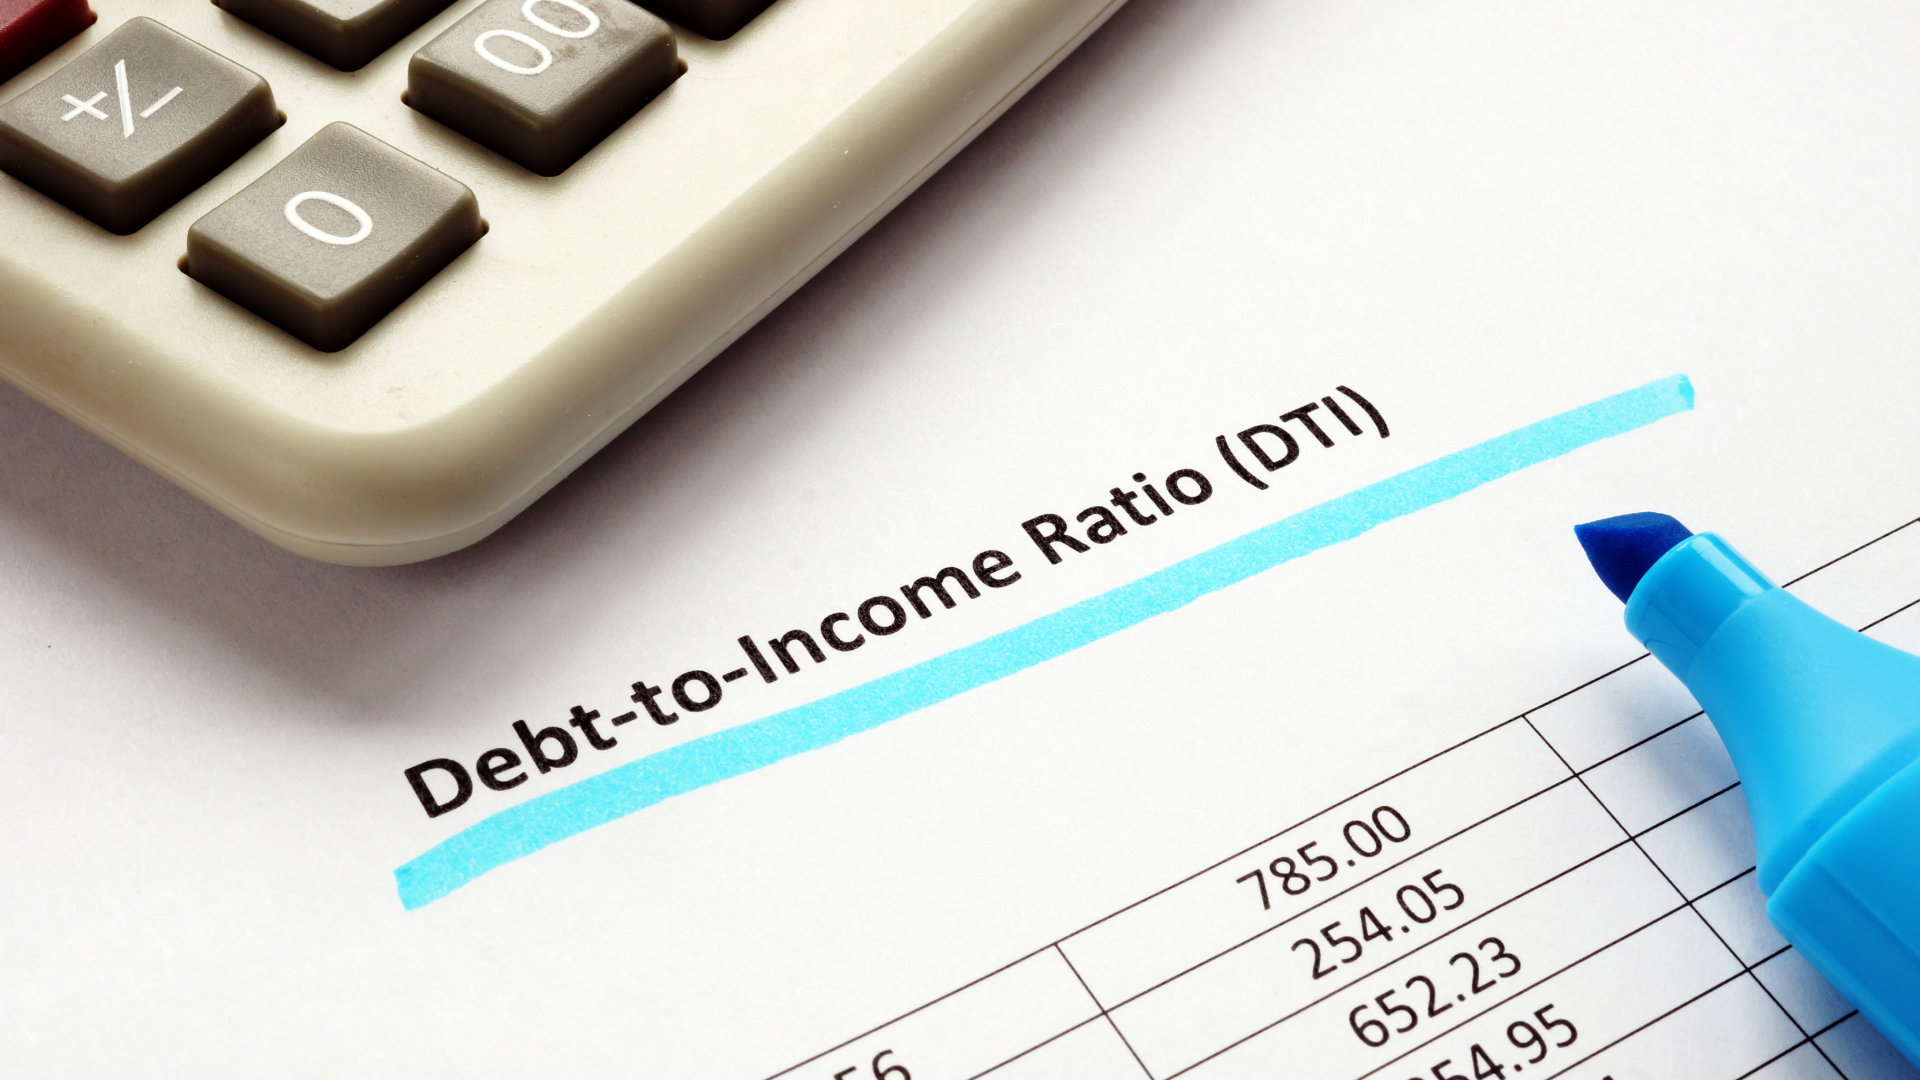 a debt-to-income ratio, or DTI, is underlined in blue marker